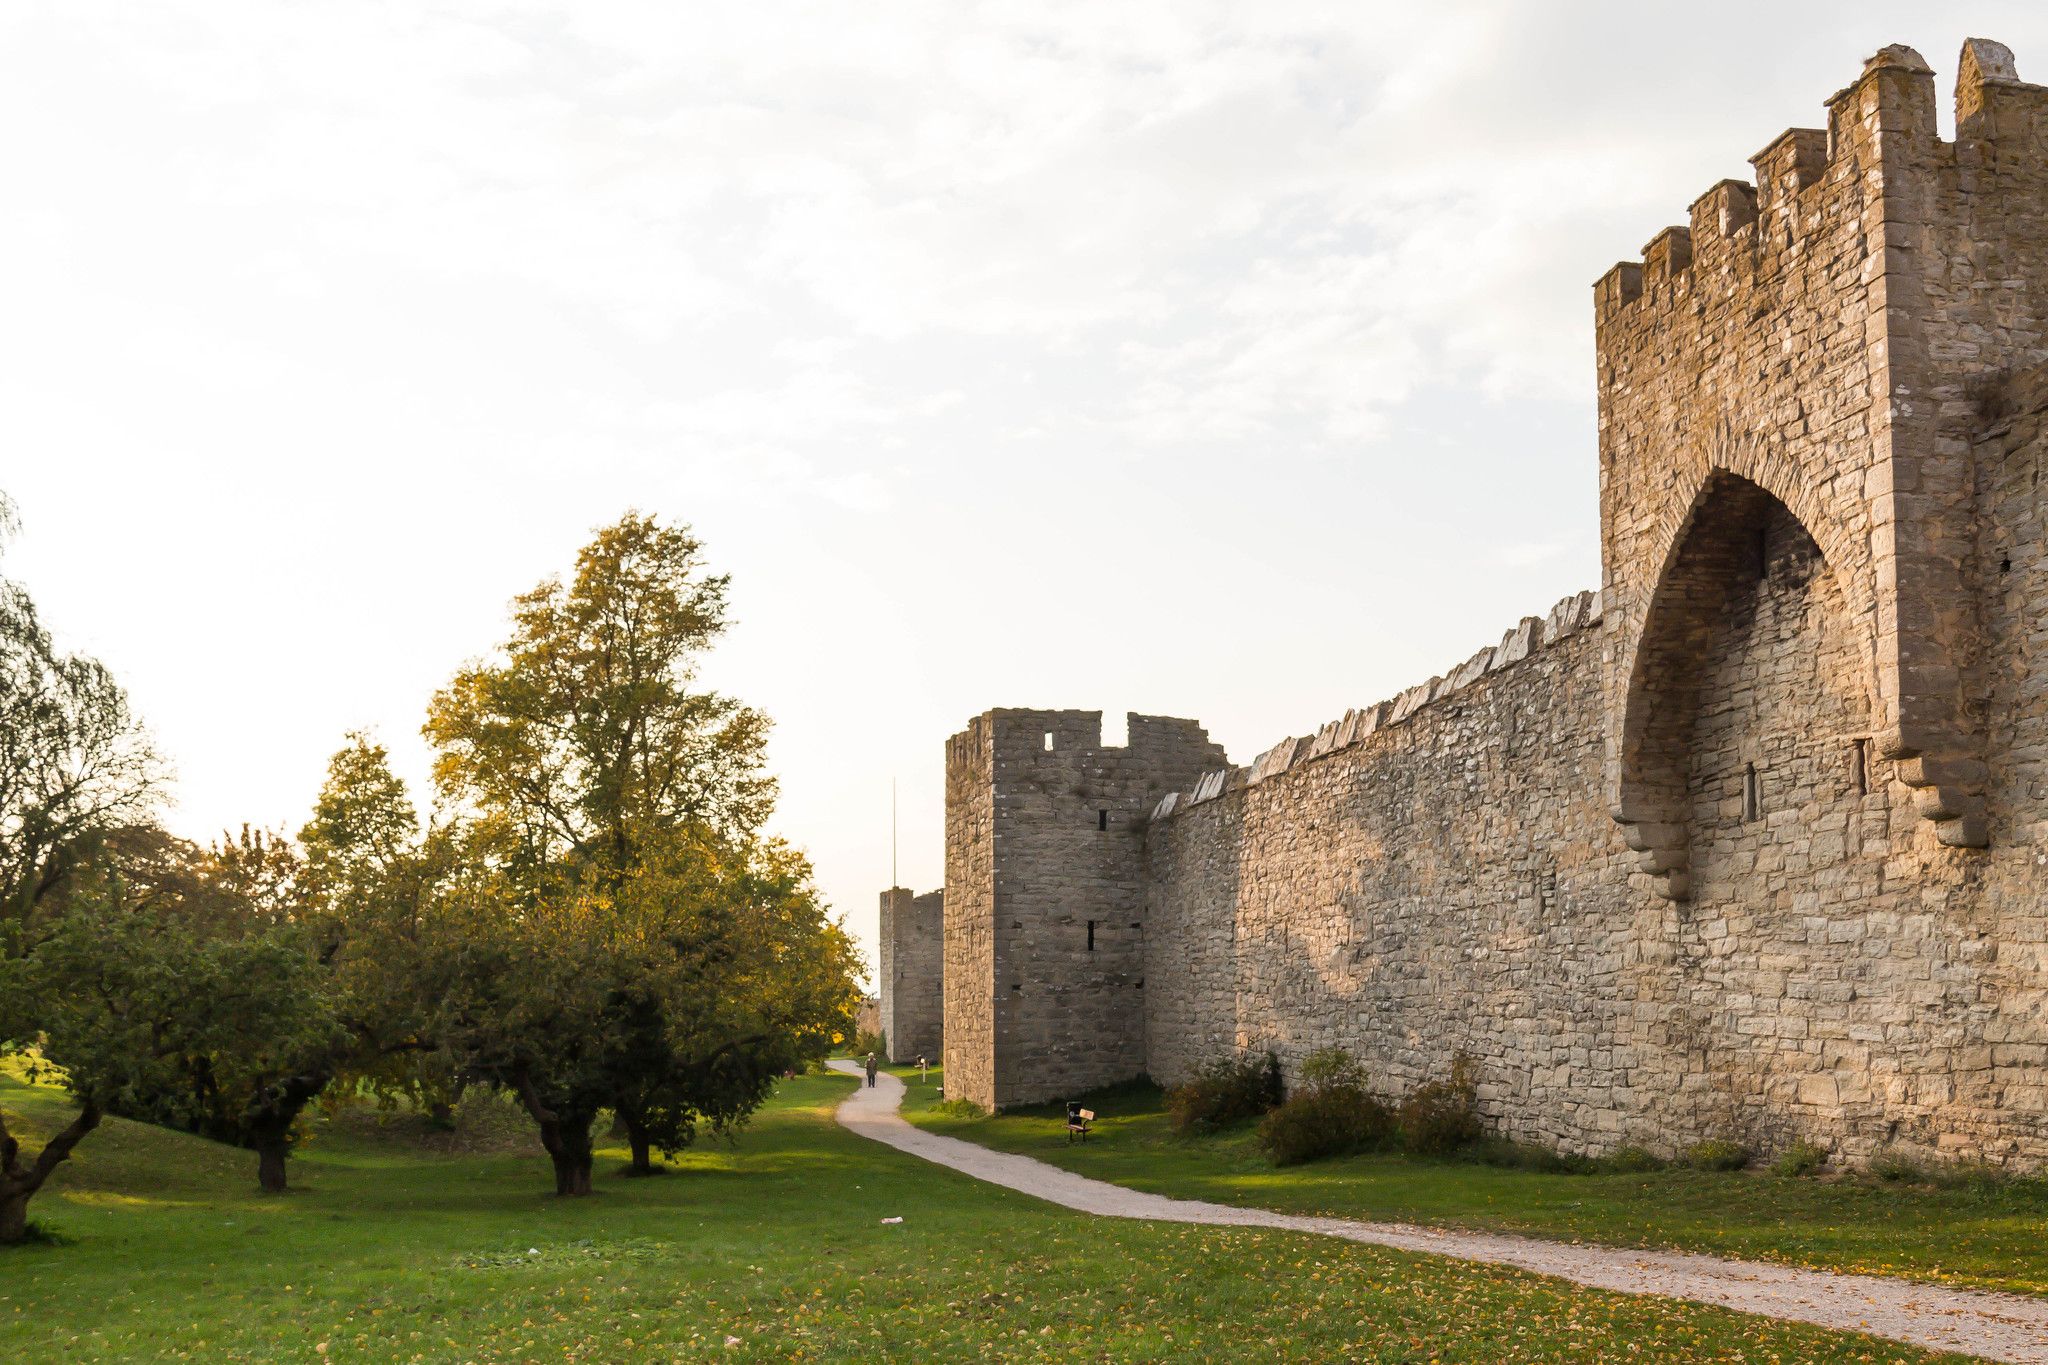 The wall of Visby, Gotland